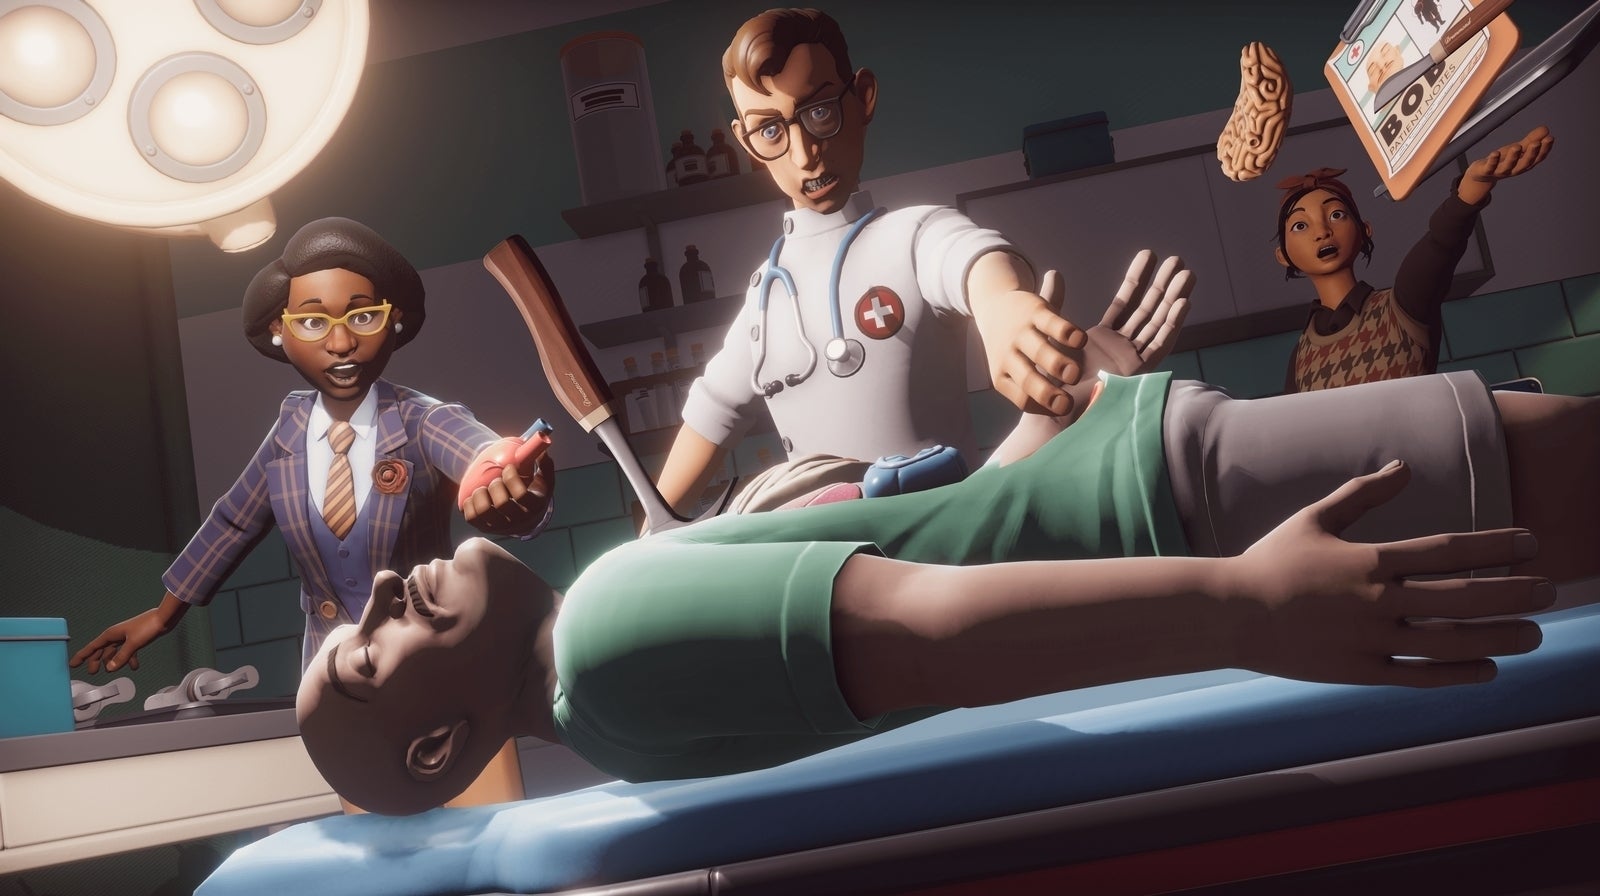 Image for After crunch and amid layoffs, Surgeon Simulator dev Bossa hopes for a fresh start in 2021